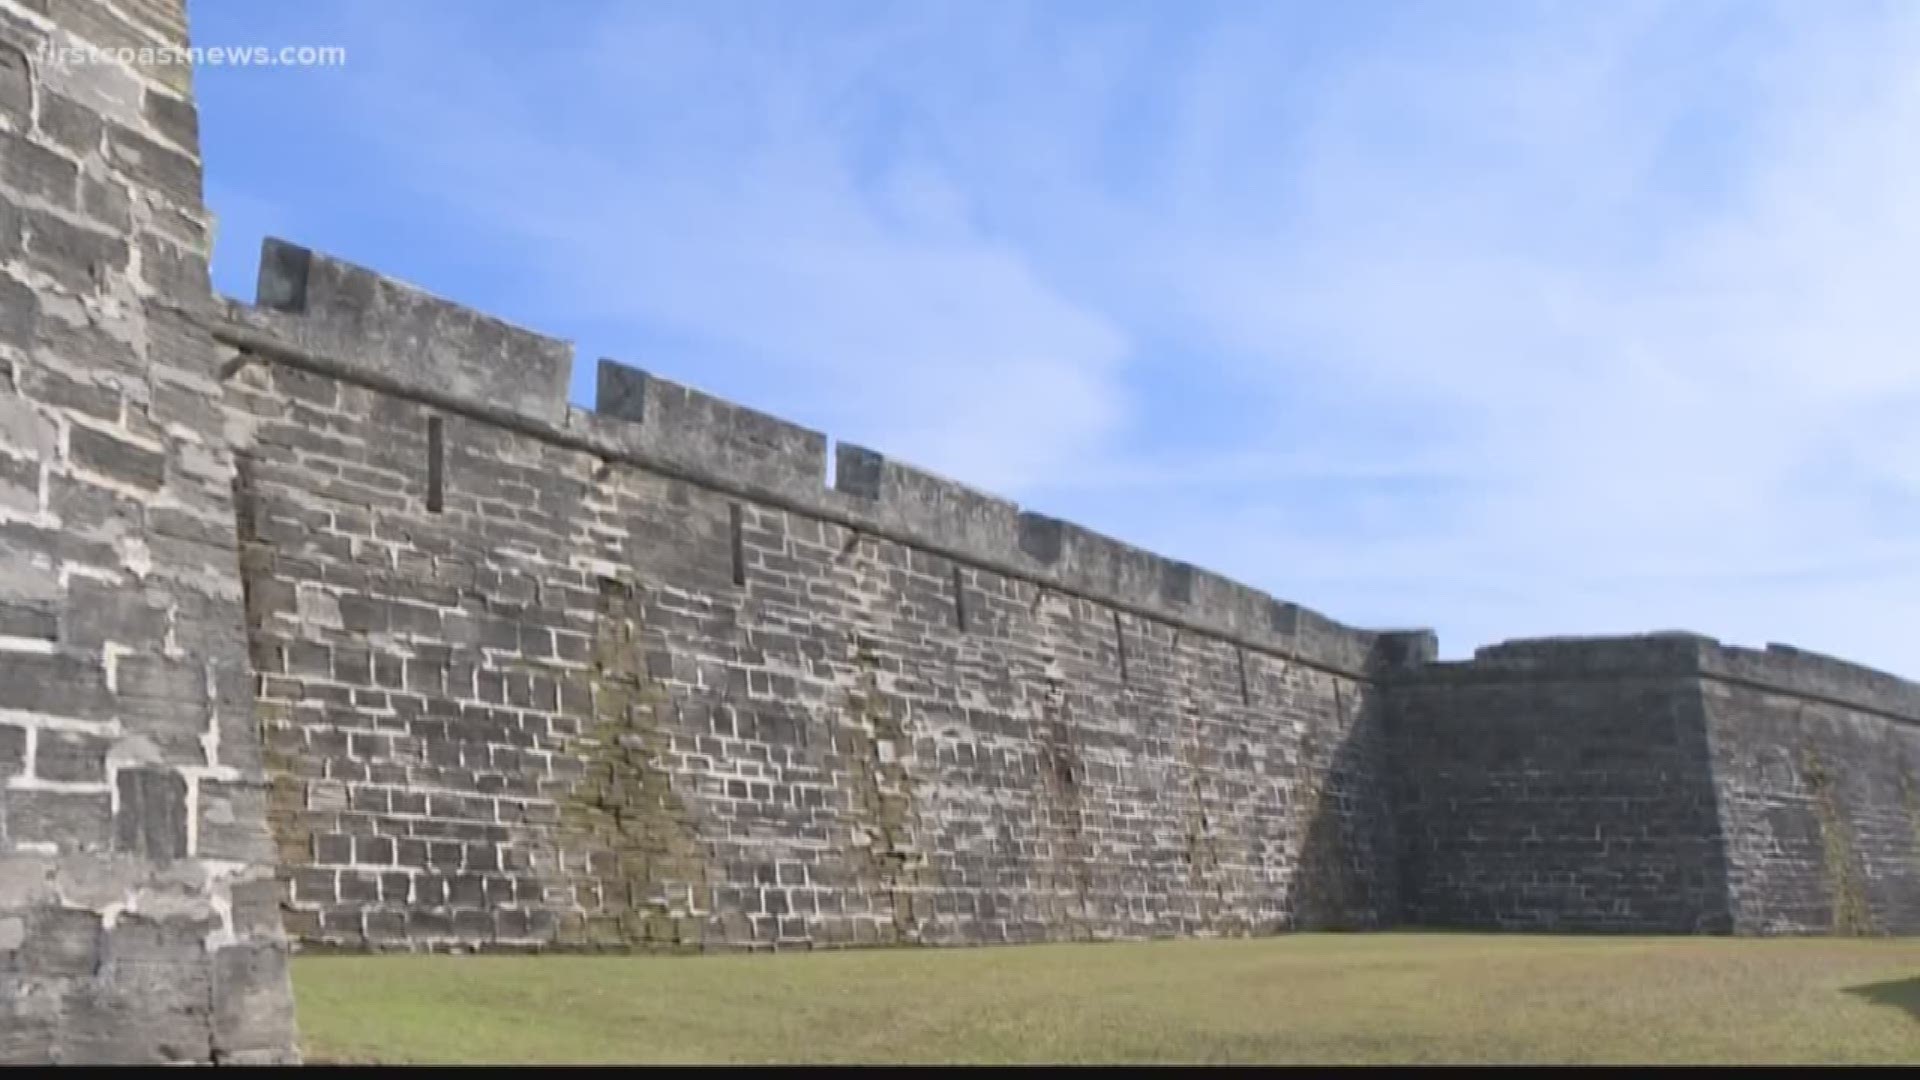 The Castillo de San Marcos is more than 300 years old and the wear-and-tear is showing.